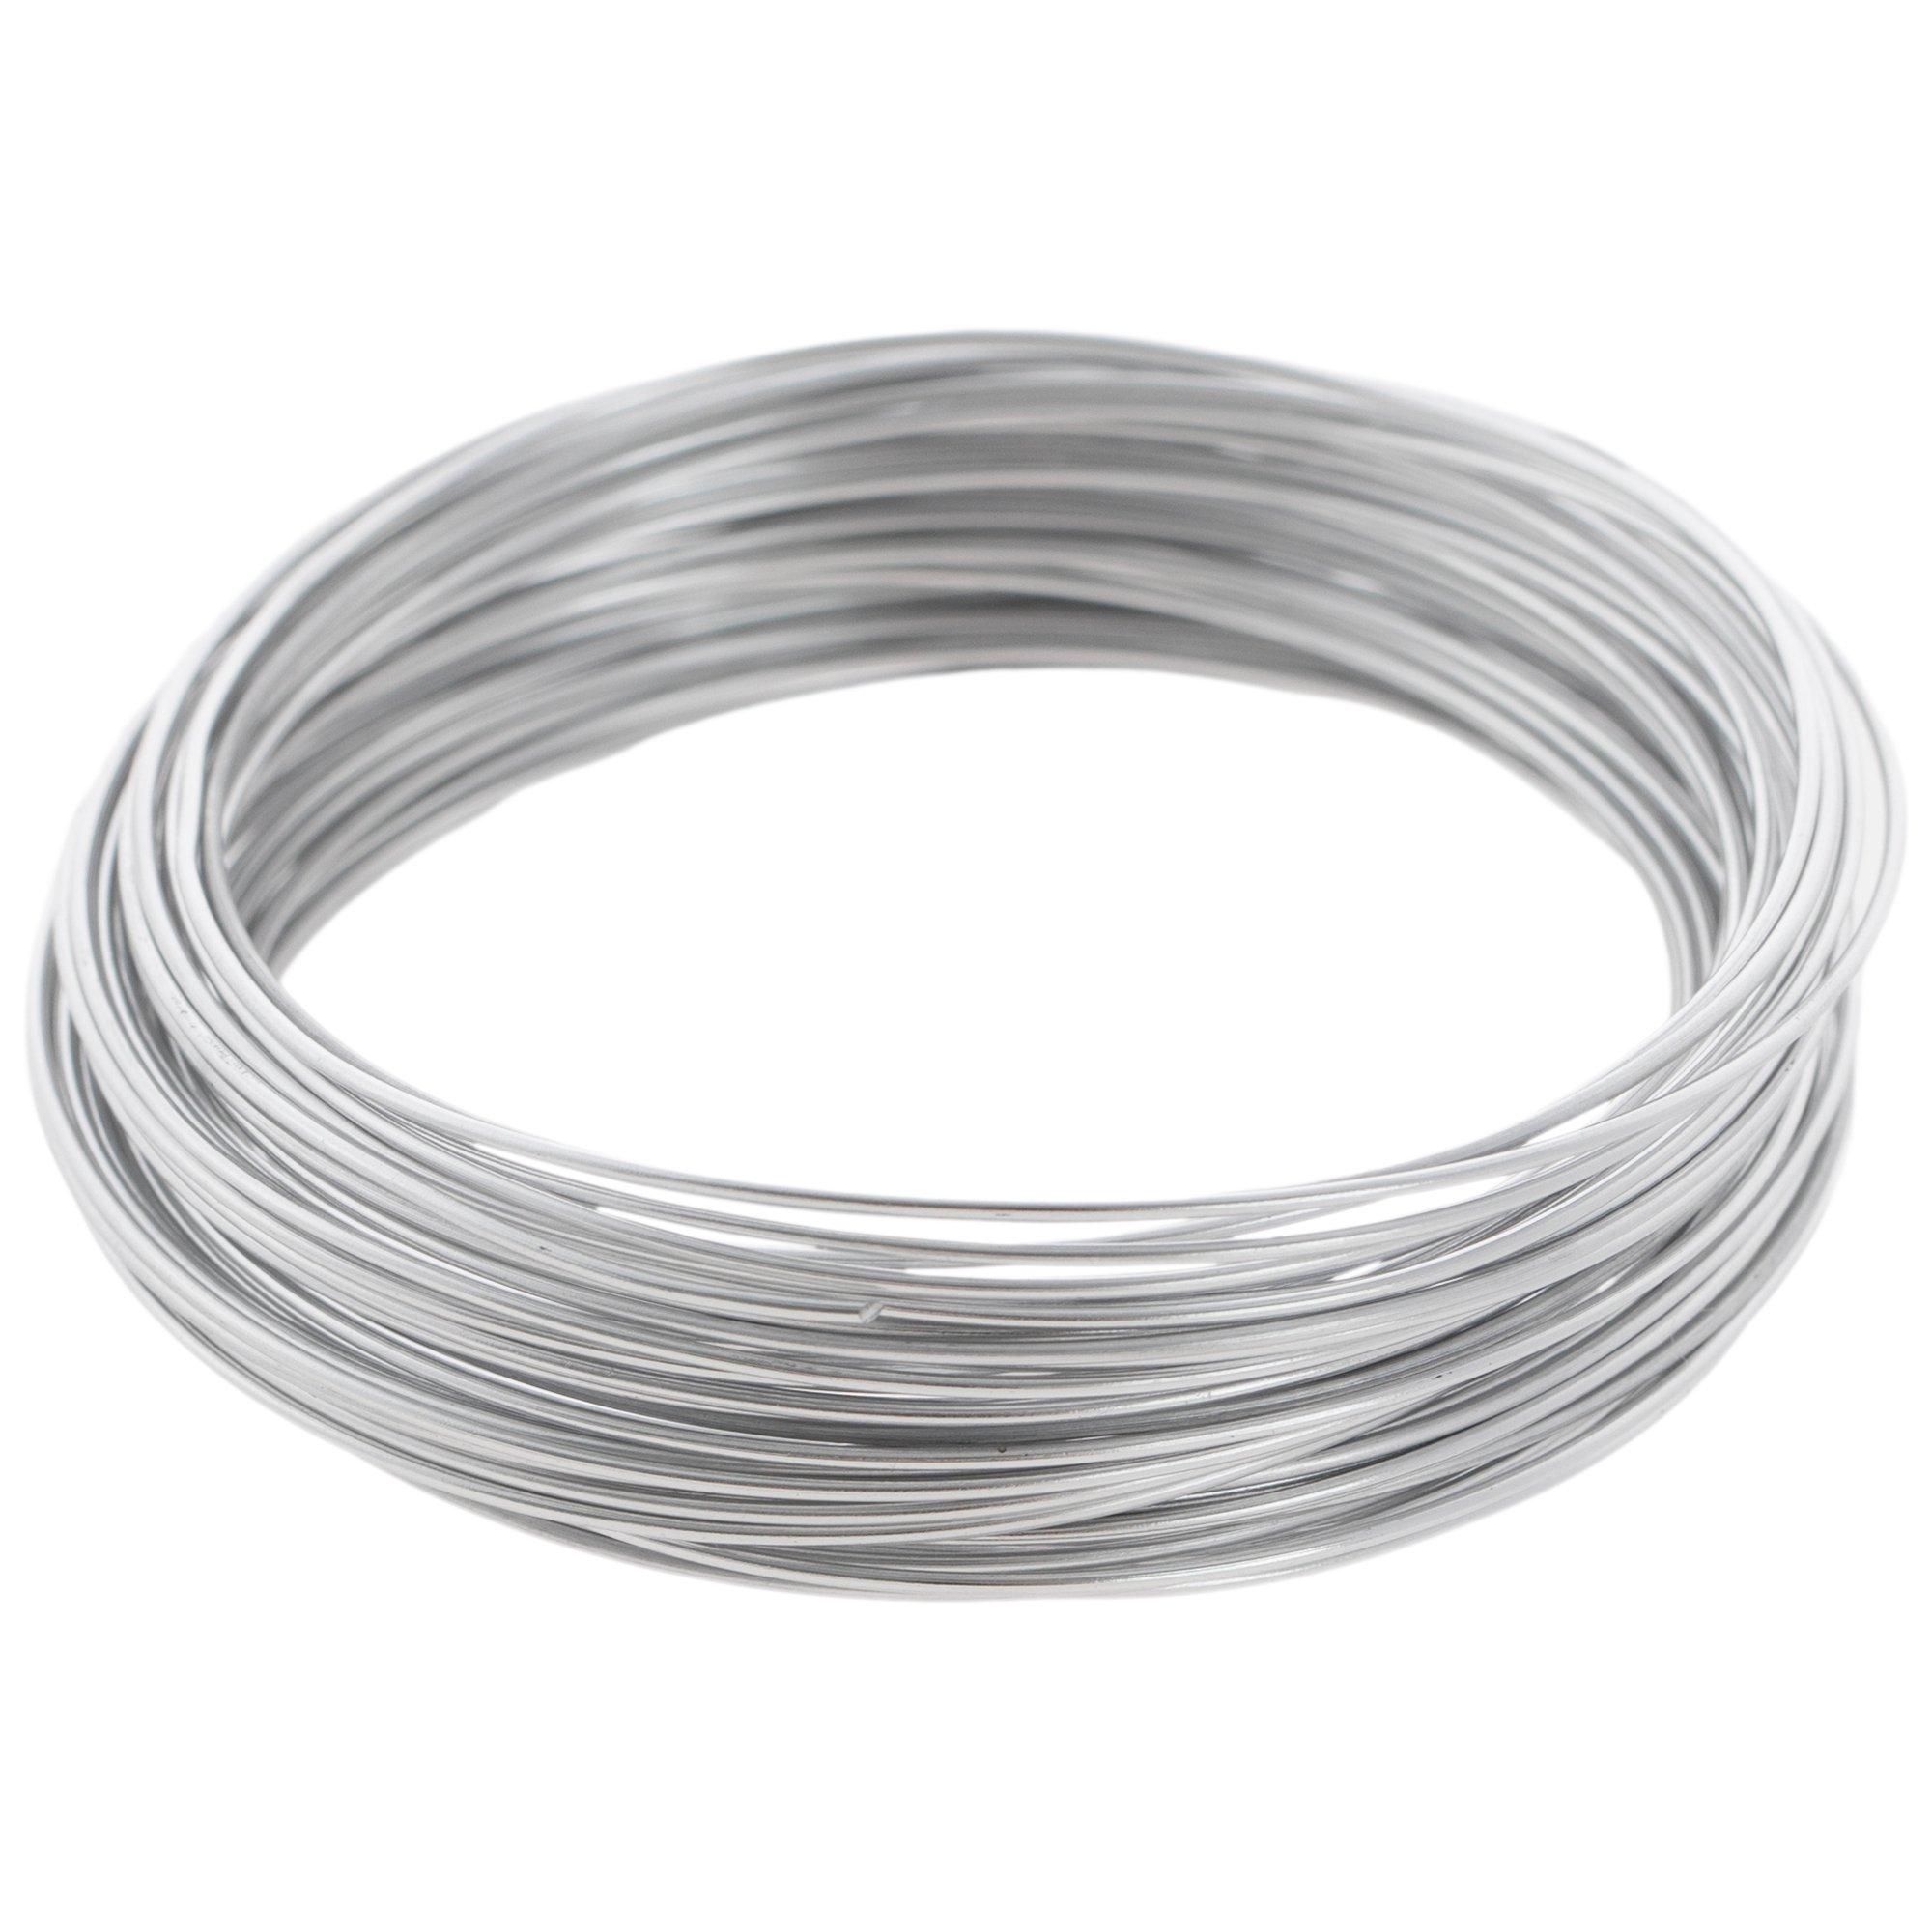 Aluminum Floral Wire, 18 Gauge, White, 18-Inch, 12-Count 